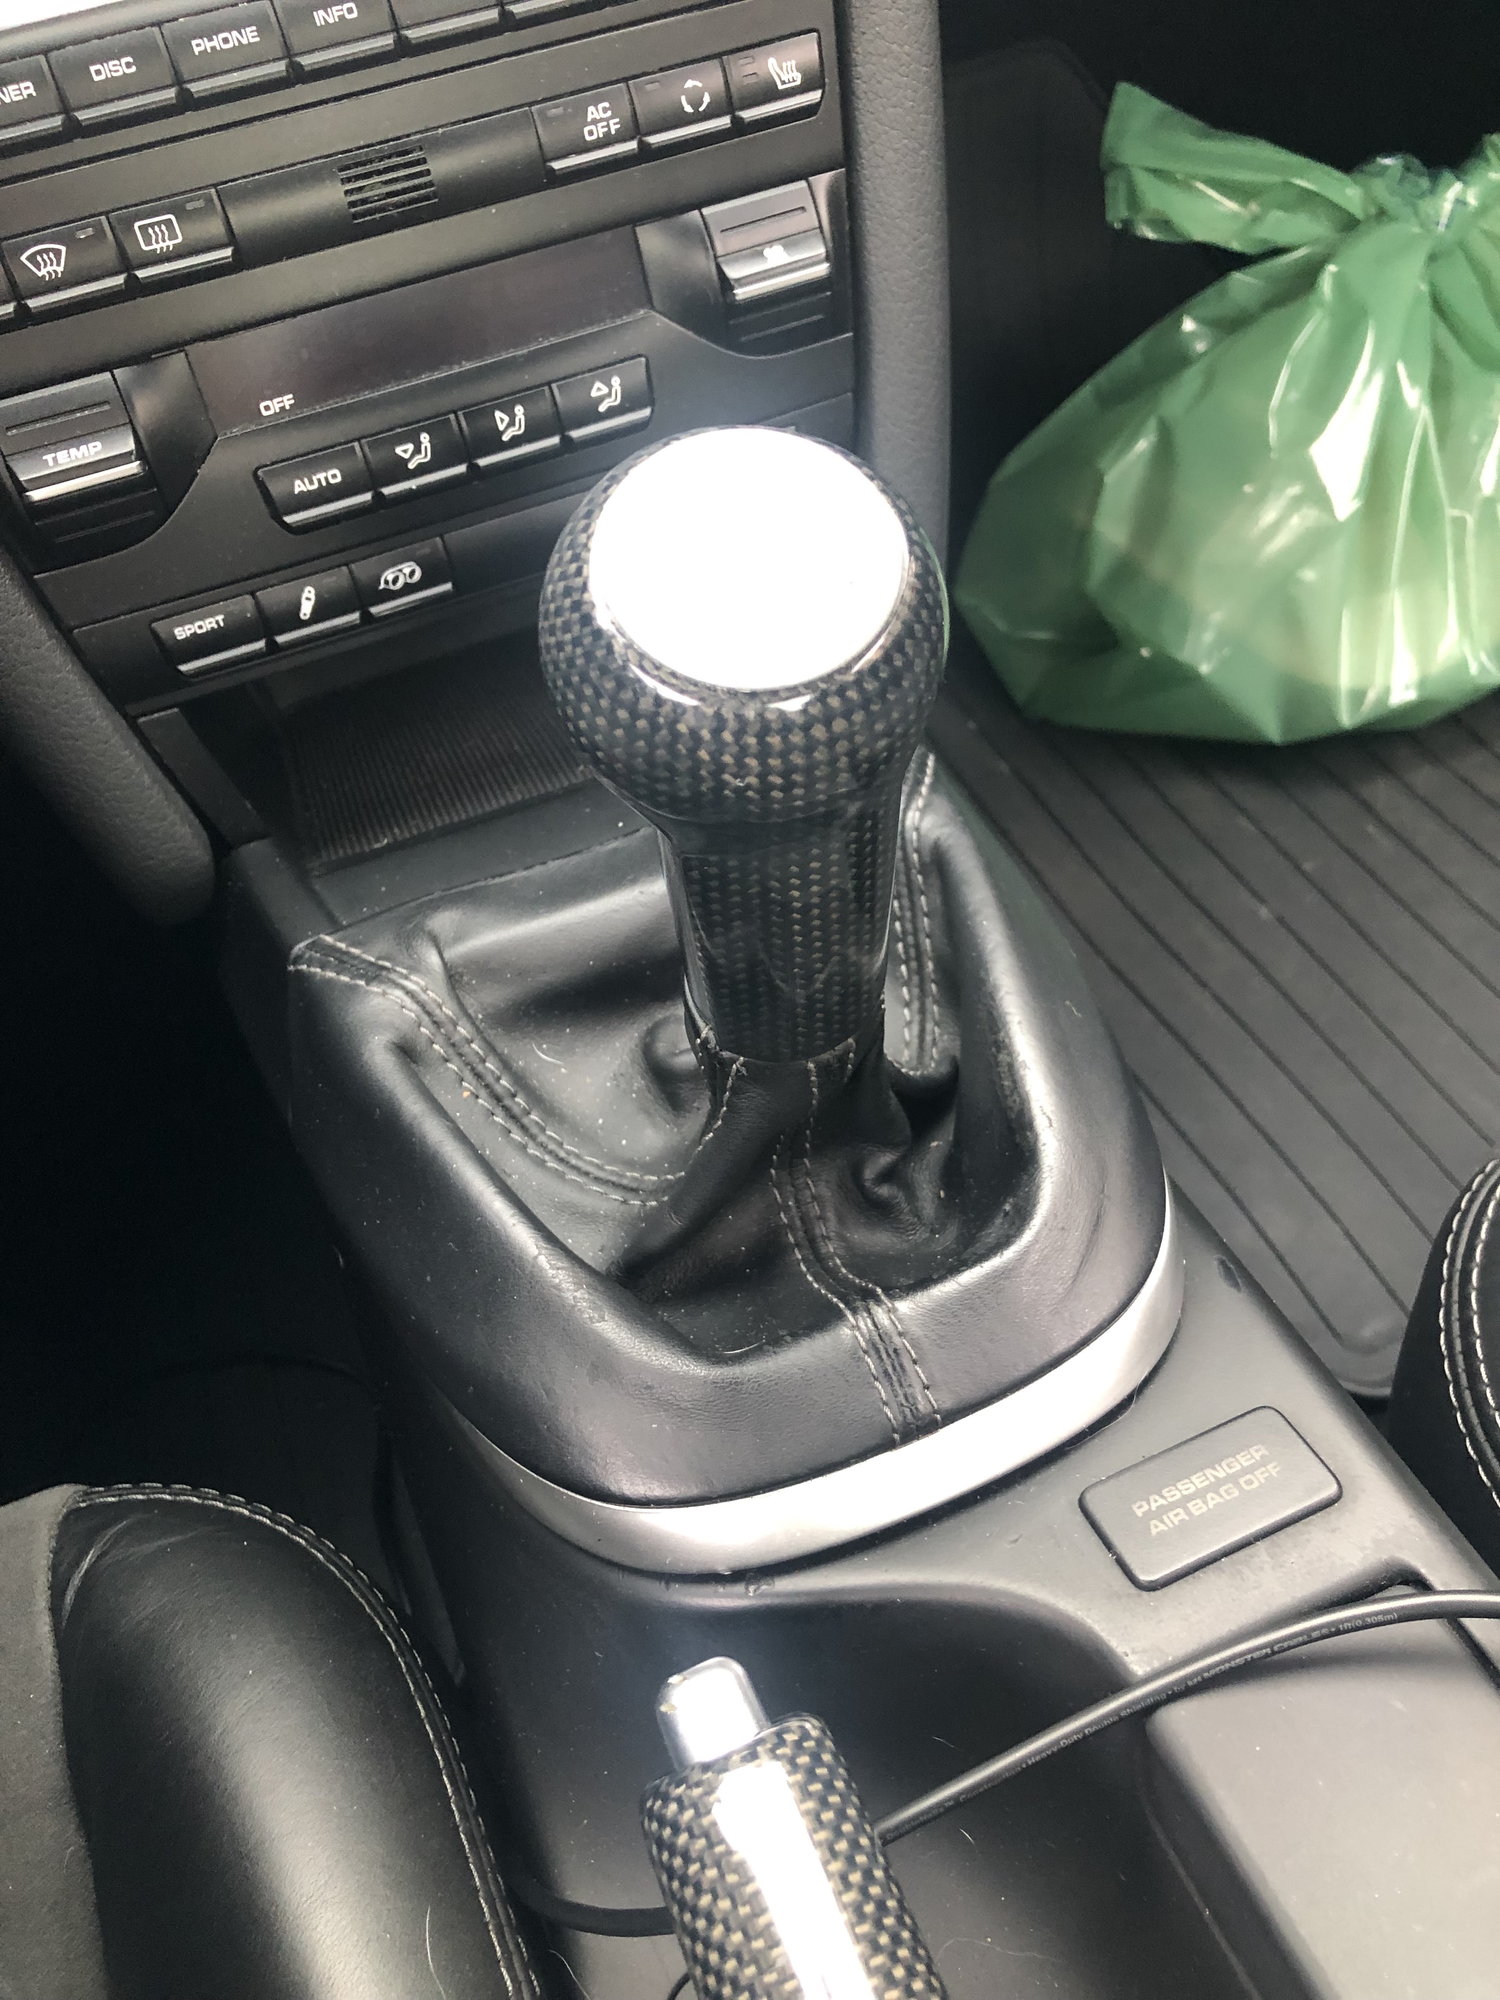 Interior/Upholstery - 996/997/Boxster Carbon Shift Knob with leather boot - Used - 2000 to 2012 Porsche 911 - Playa Del Rey, CA 90293, United States